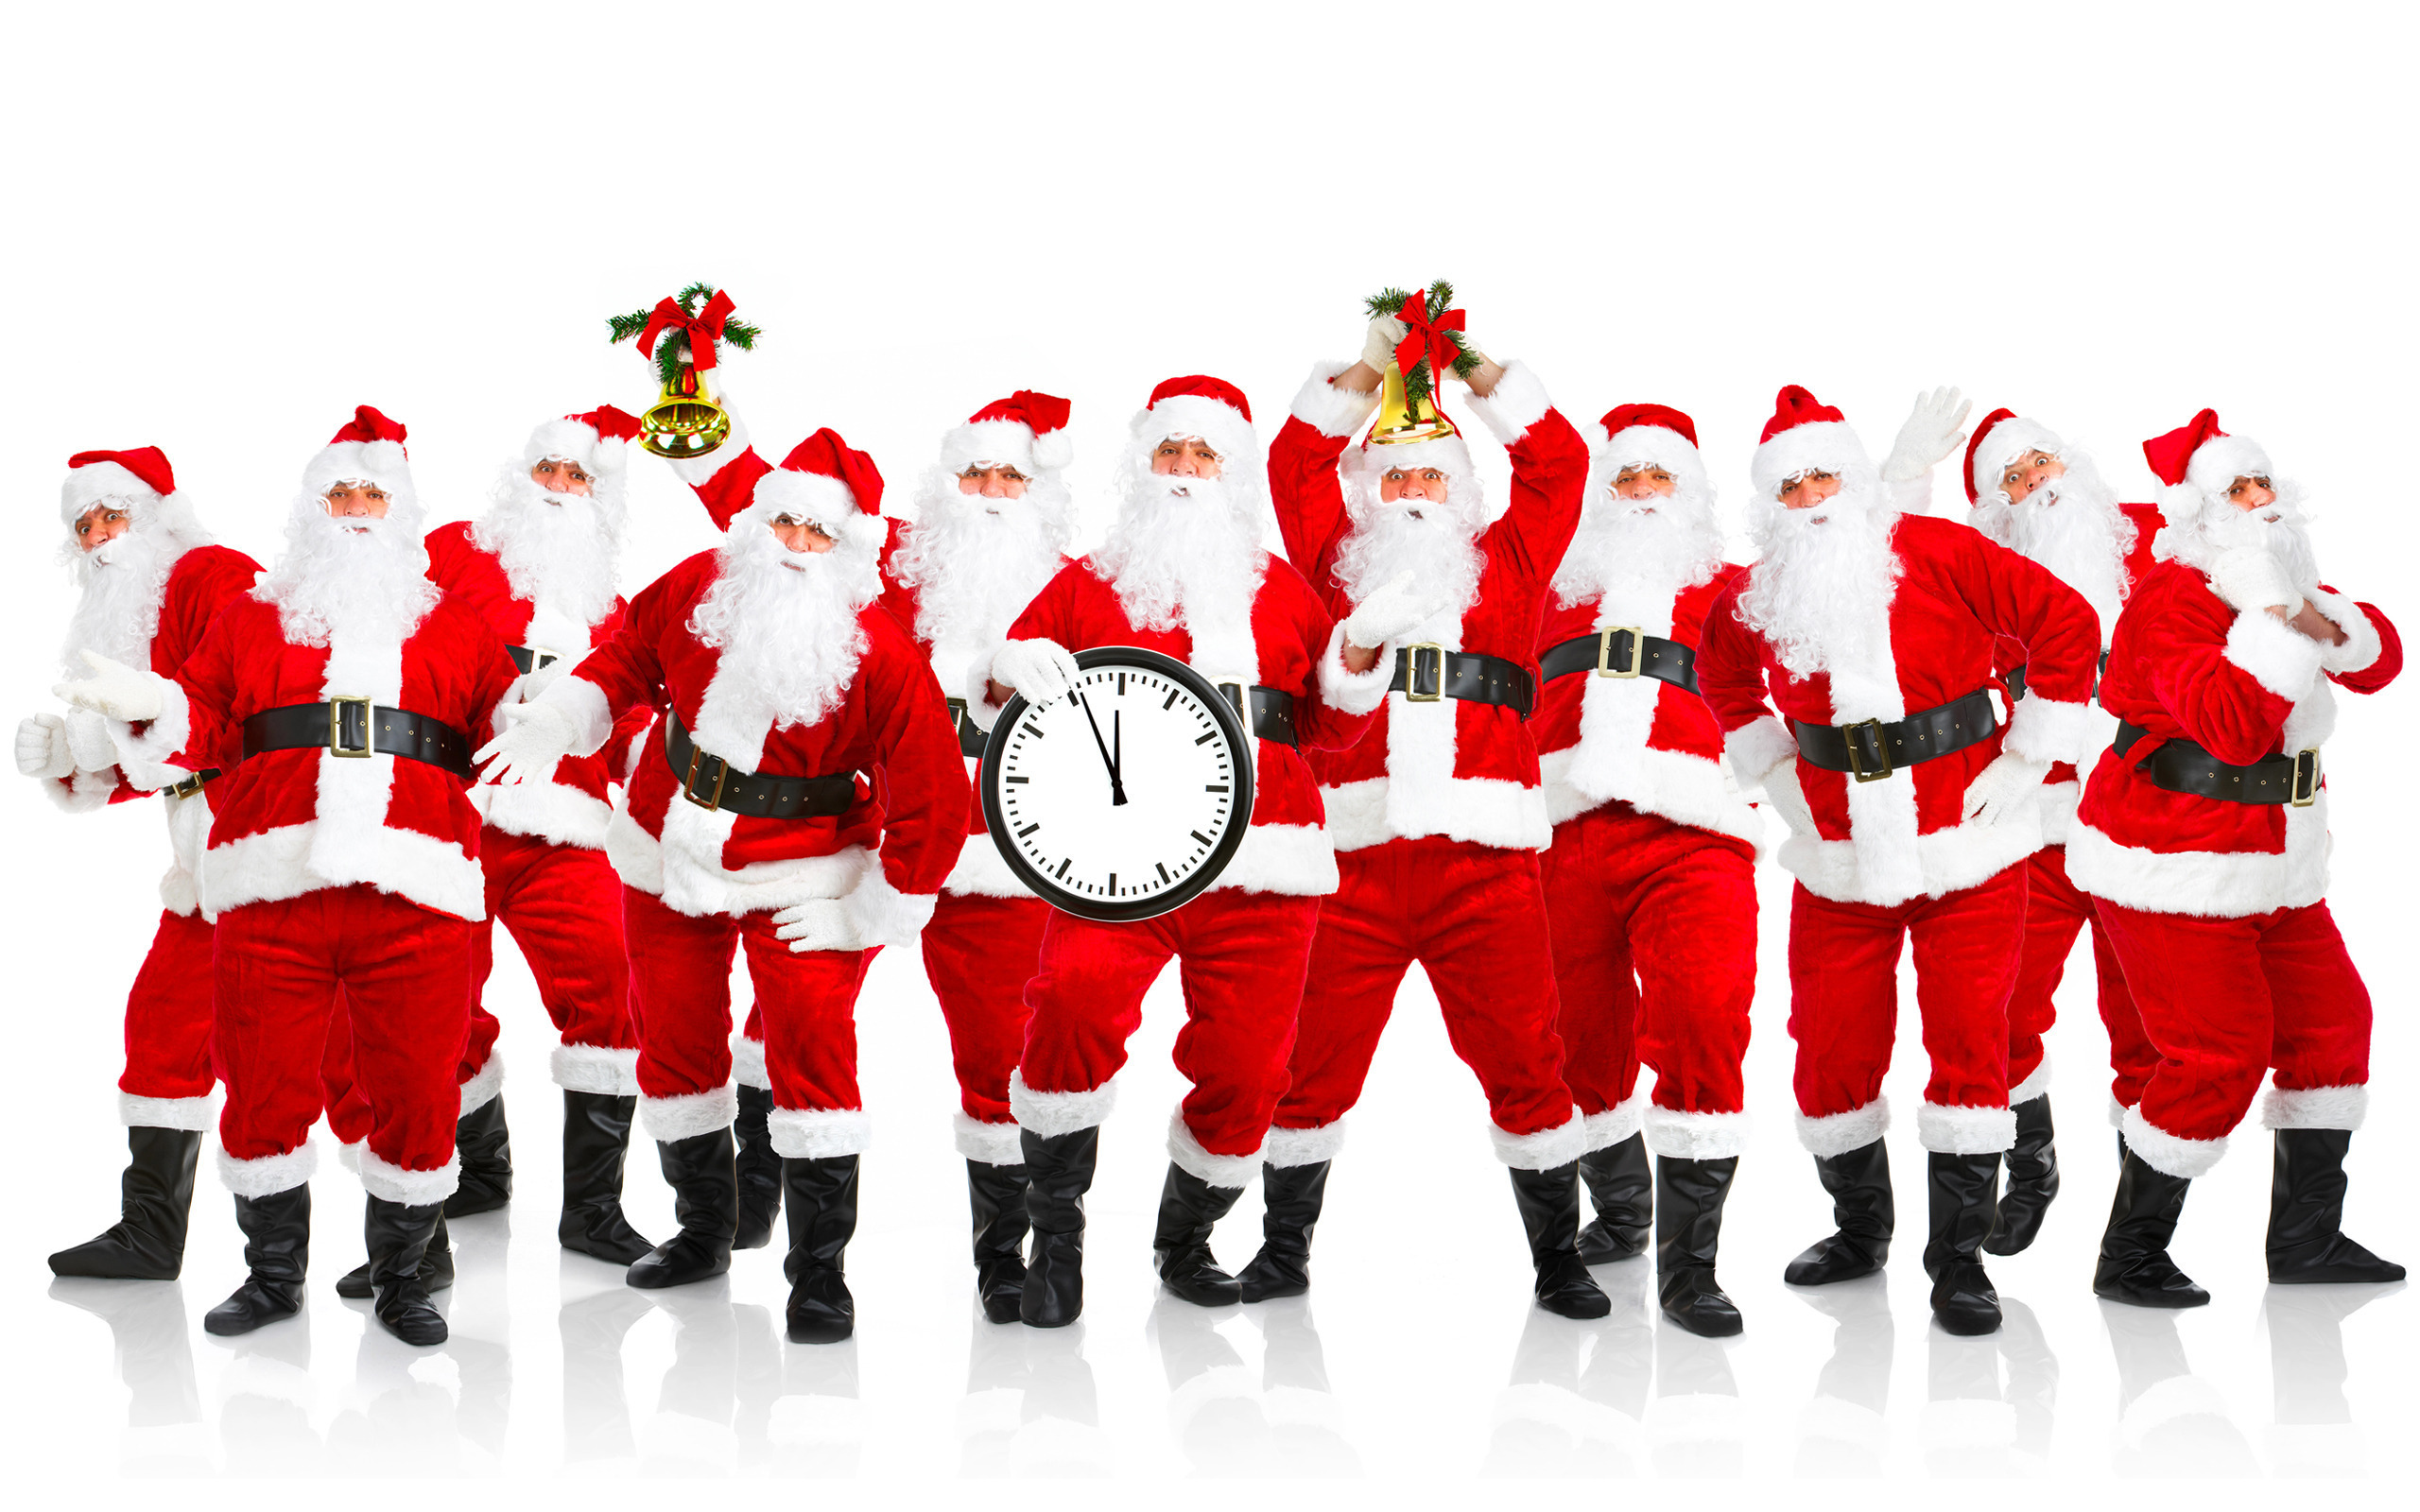 Cool Wallpapers people, holidays, new year, santa claus, christmas xmas, white